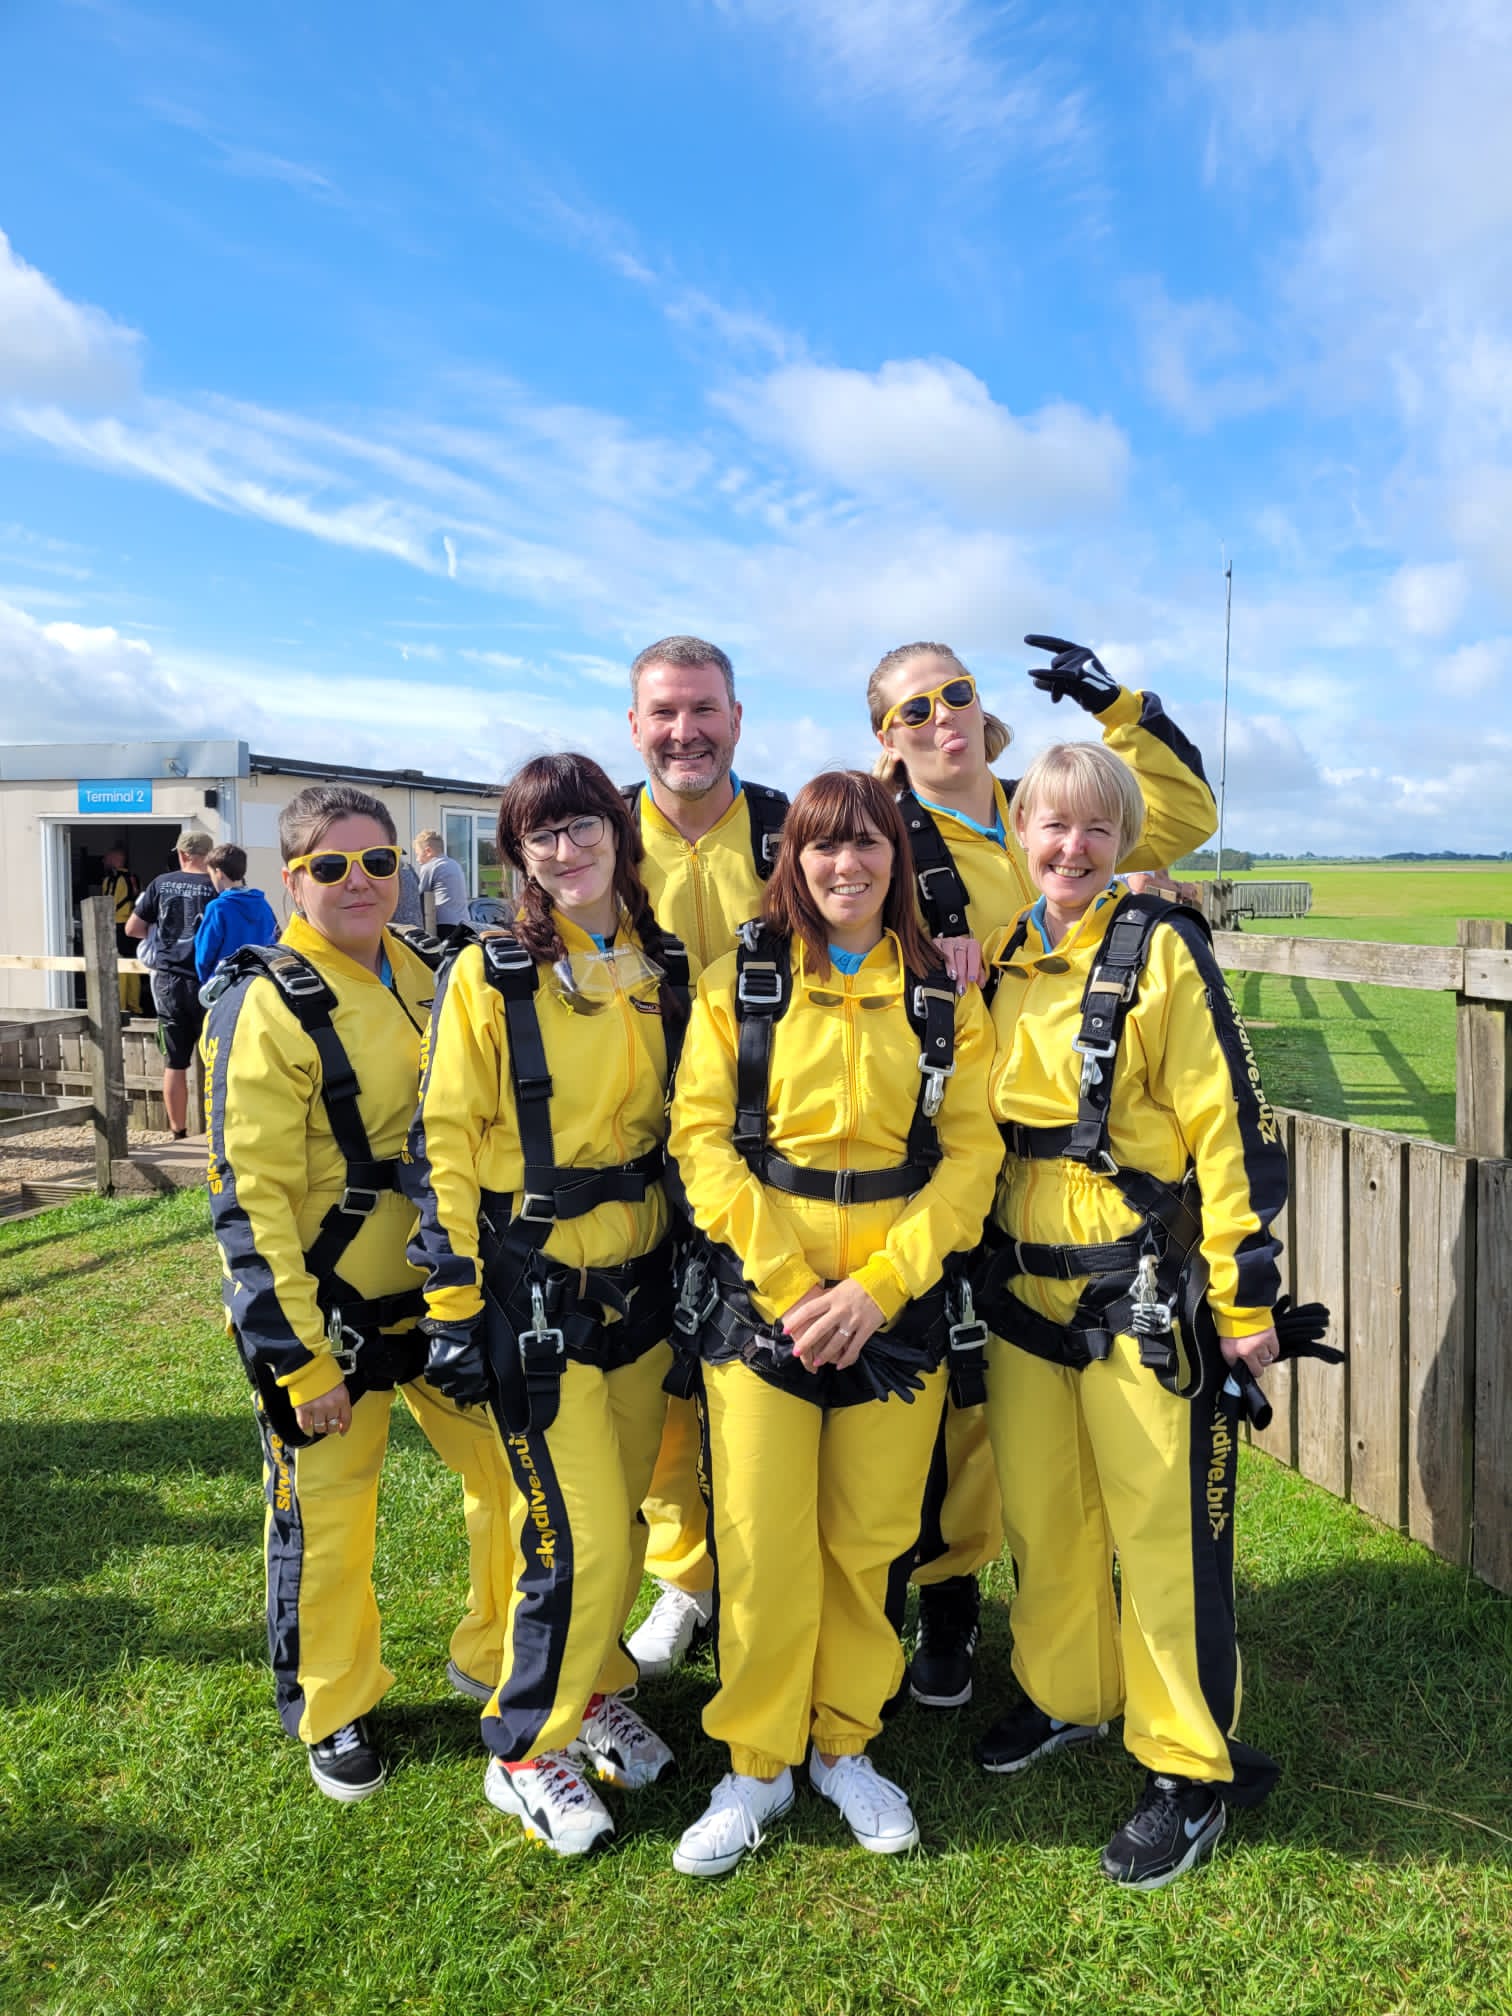 Read more about the article Daredevil skydivers in 15,000 feet charity jump for hospice